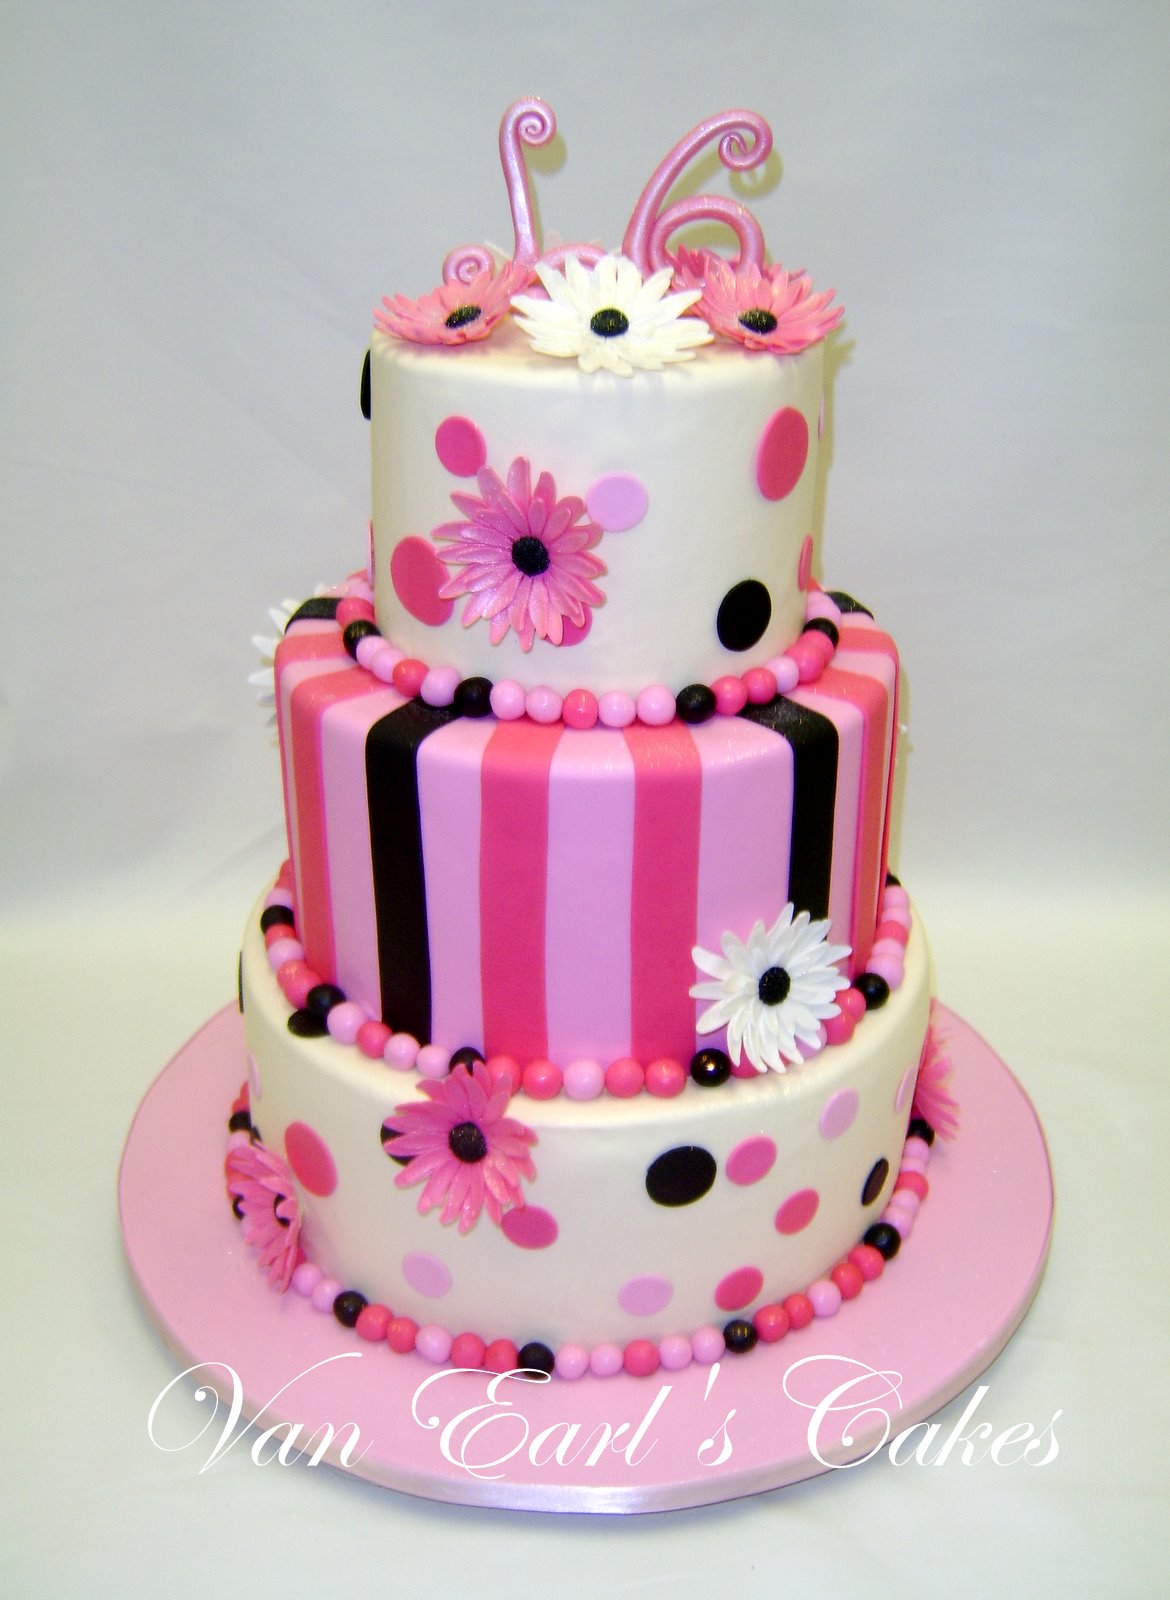 cool cake ideas for girls three tier sweet sixteen cake designed in shades of pink, white and 